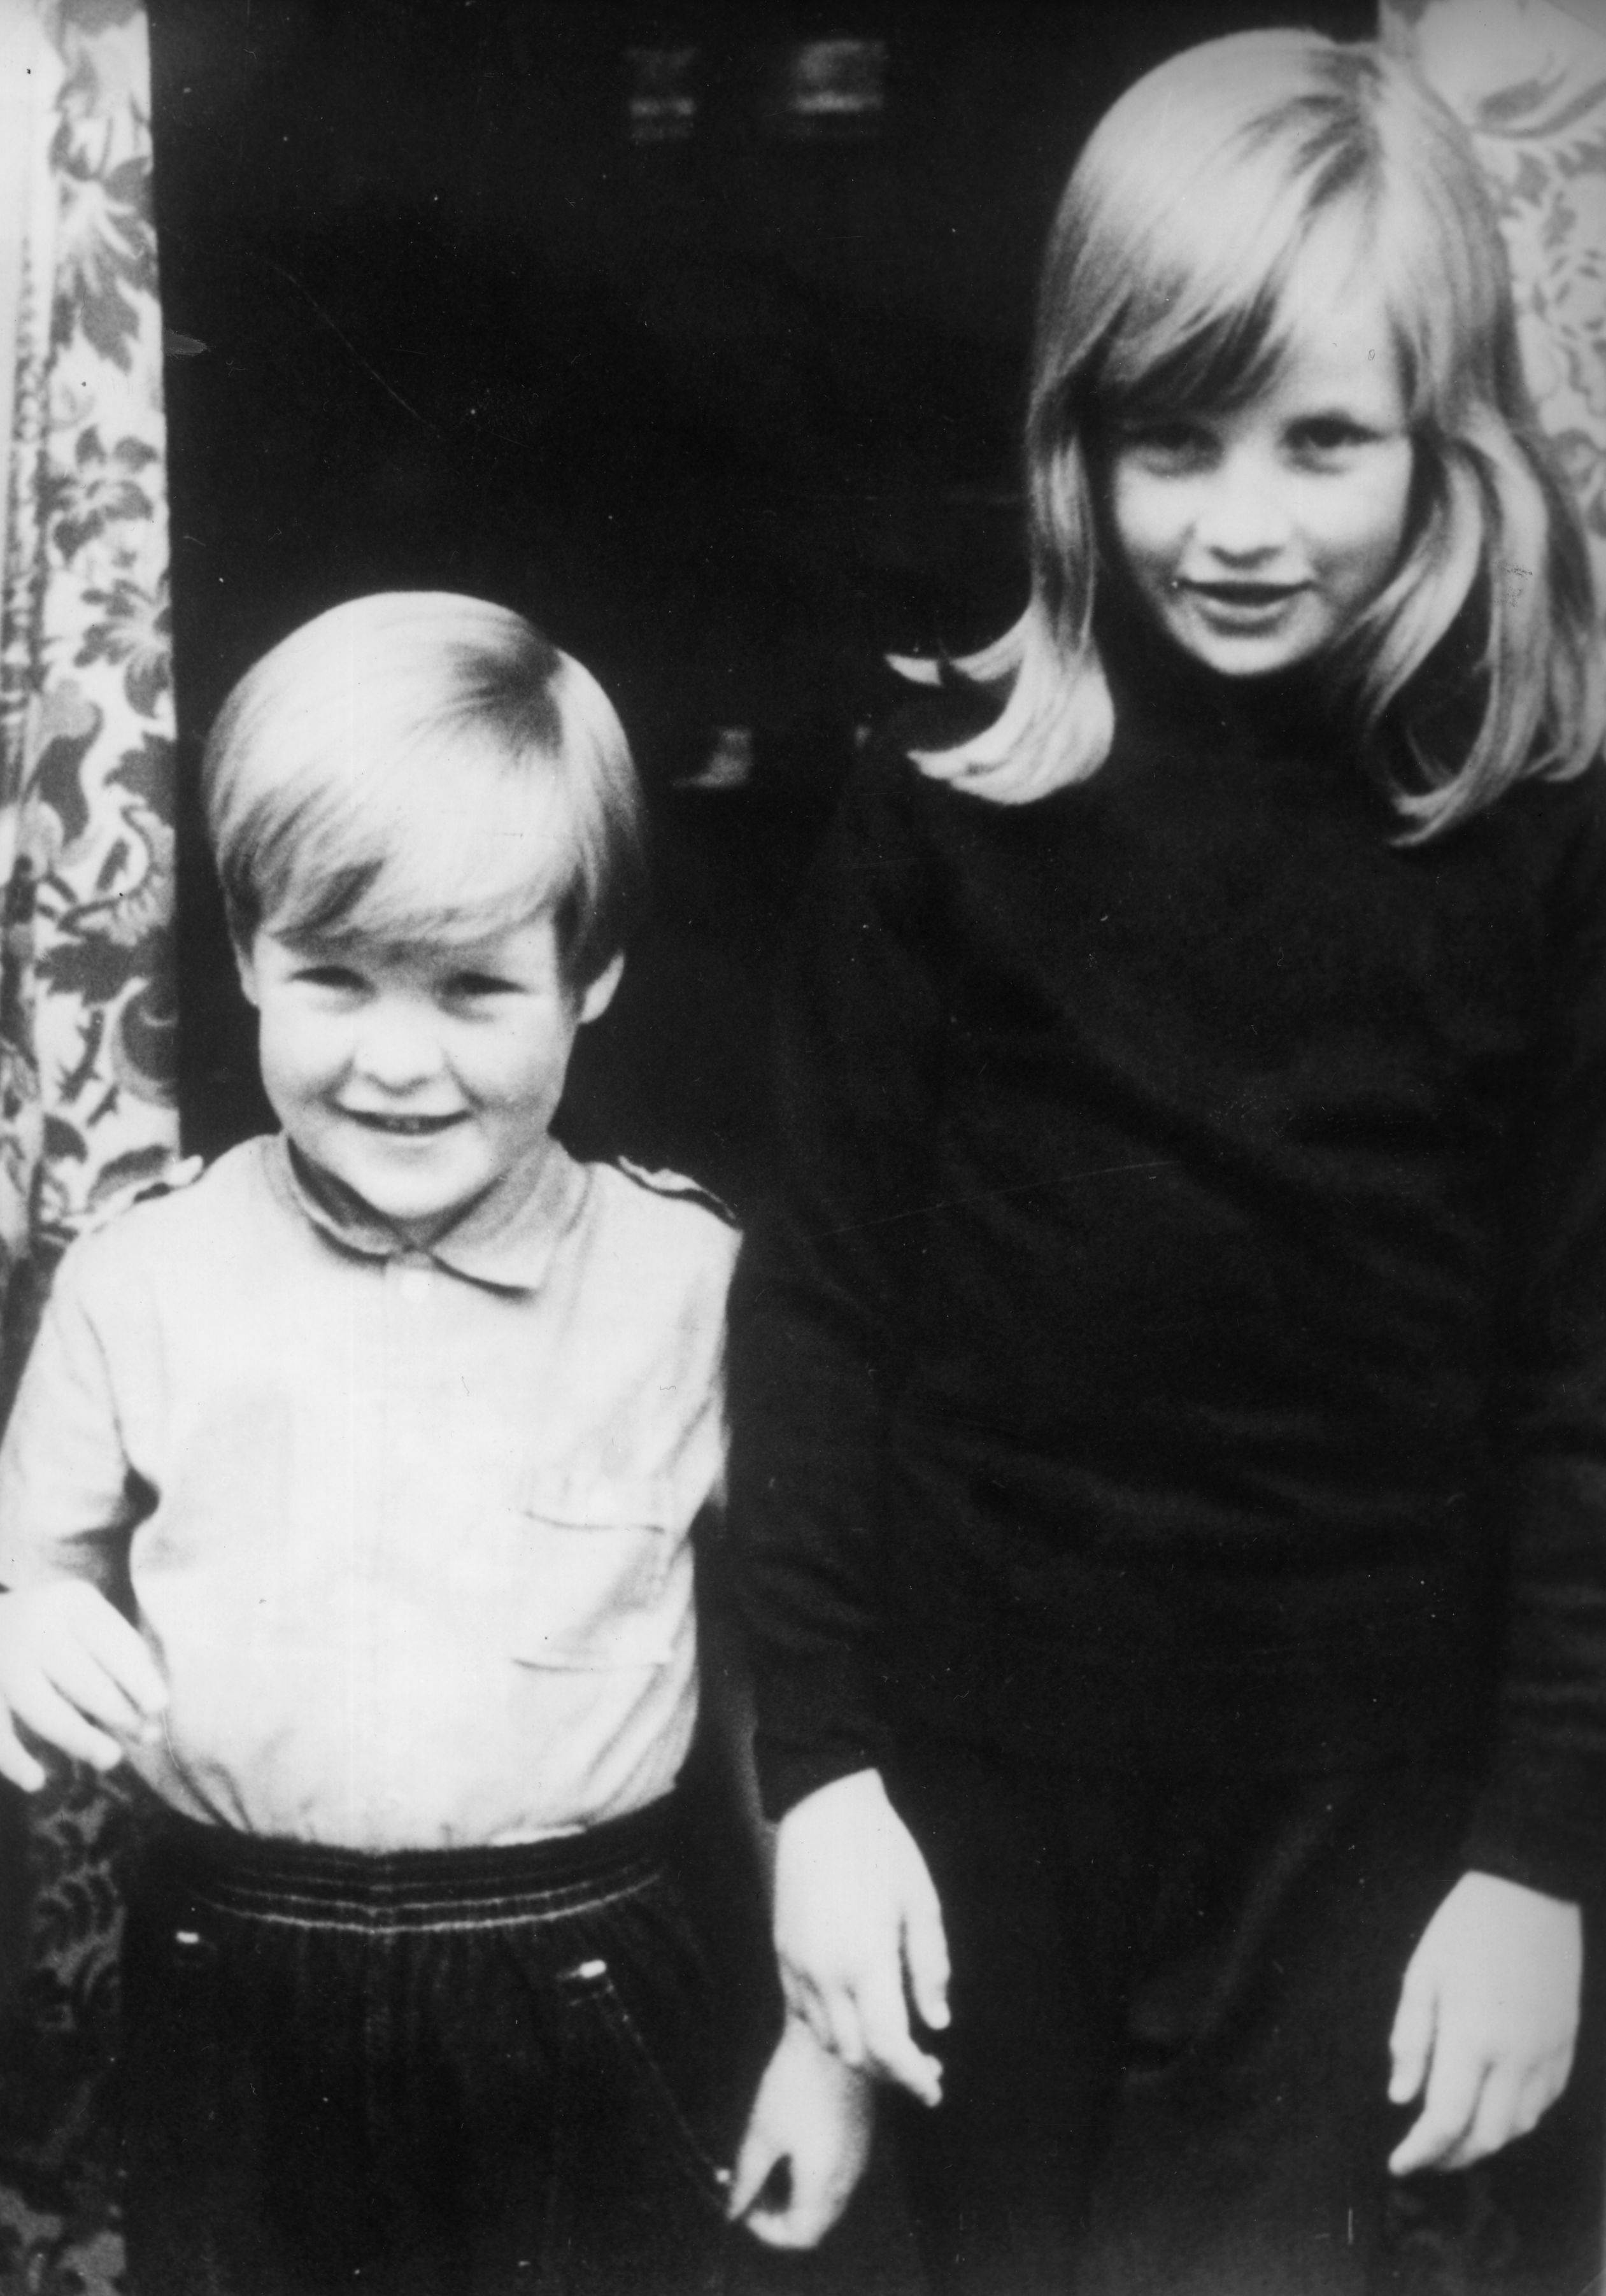 Lady Diana Spencer with her brother Charles, Viscount Althorp at their home in Berkshire in 1968. / Source: Getty Images